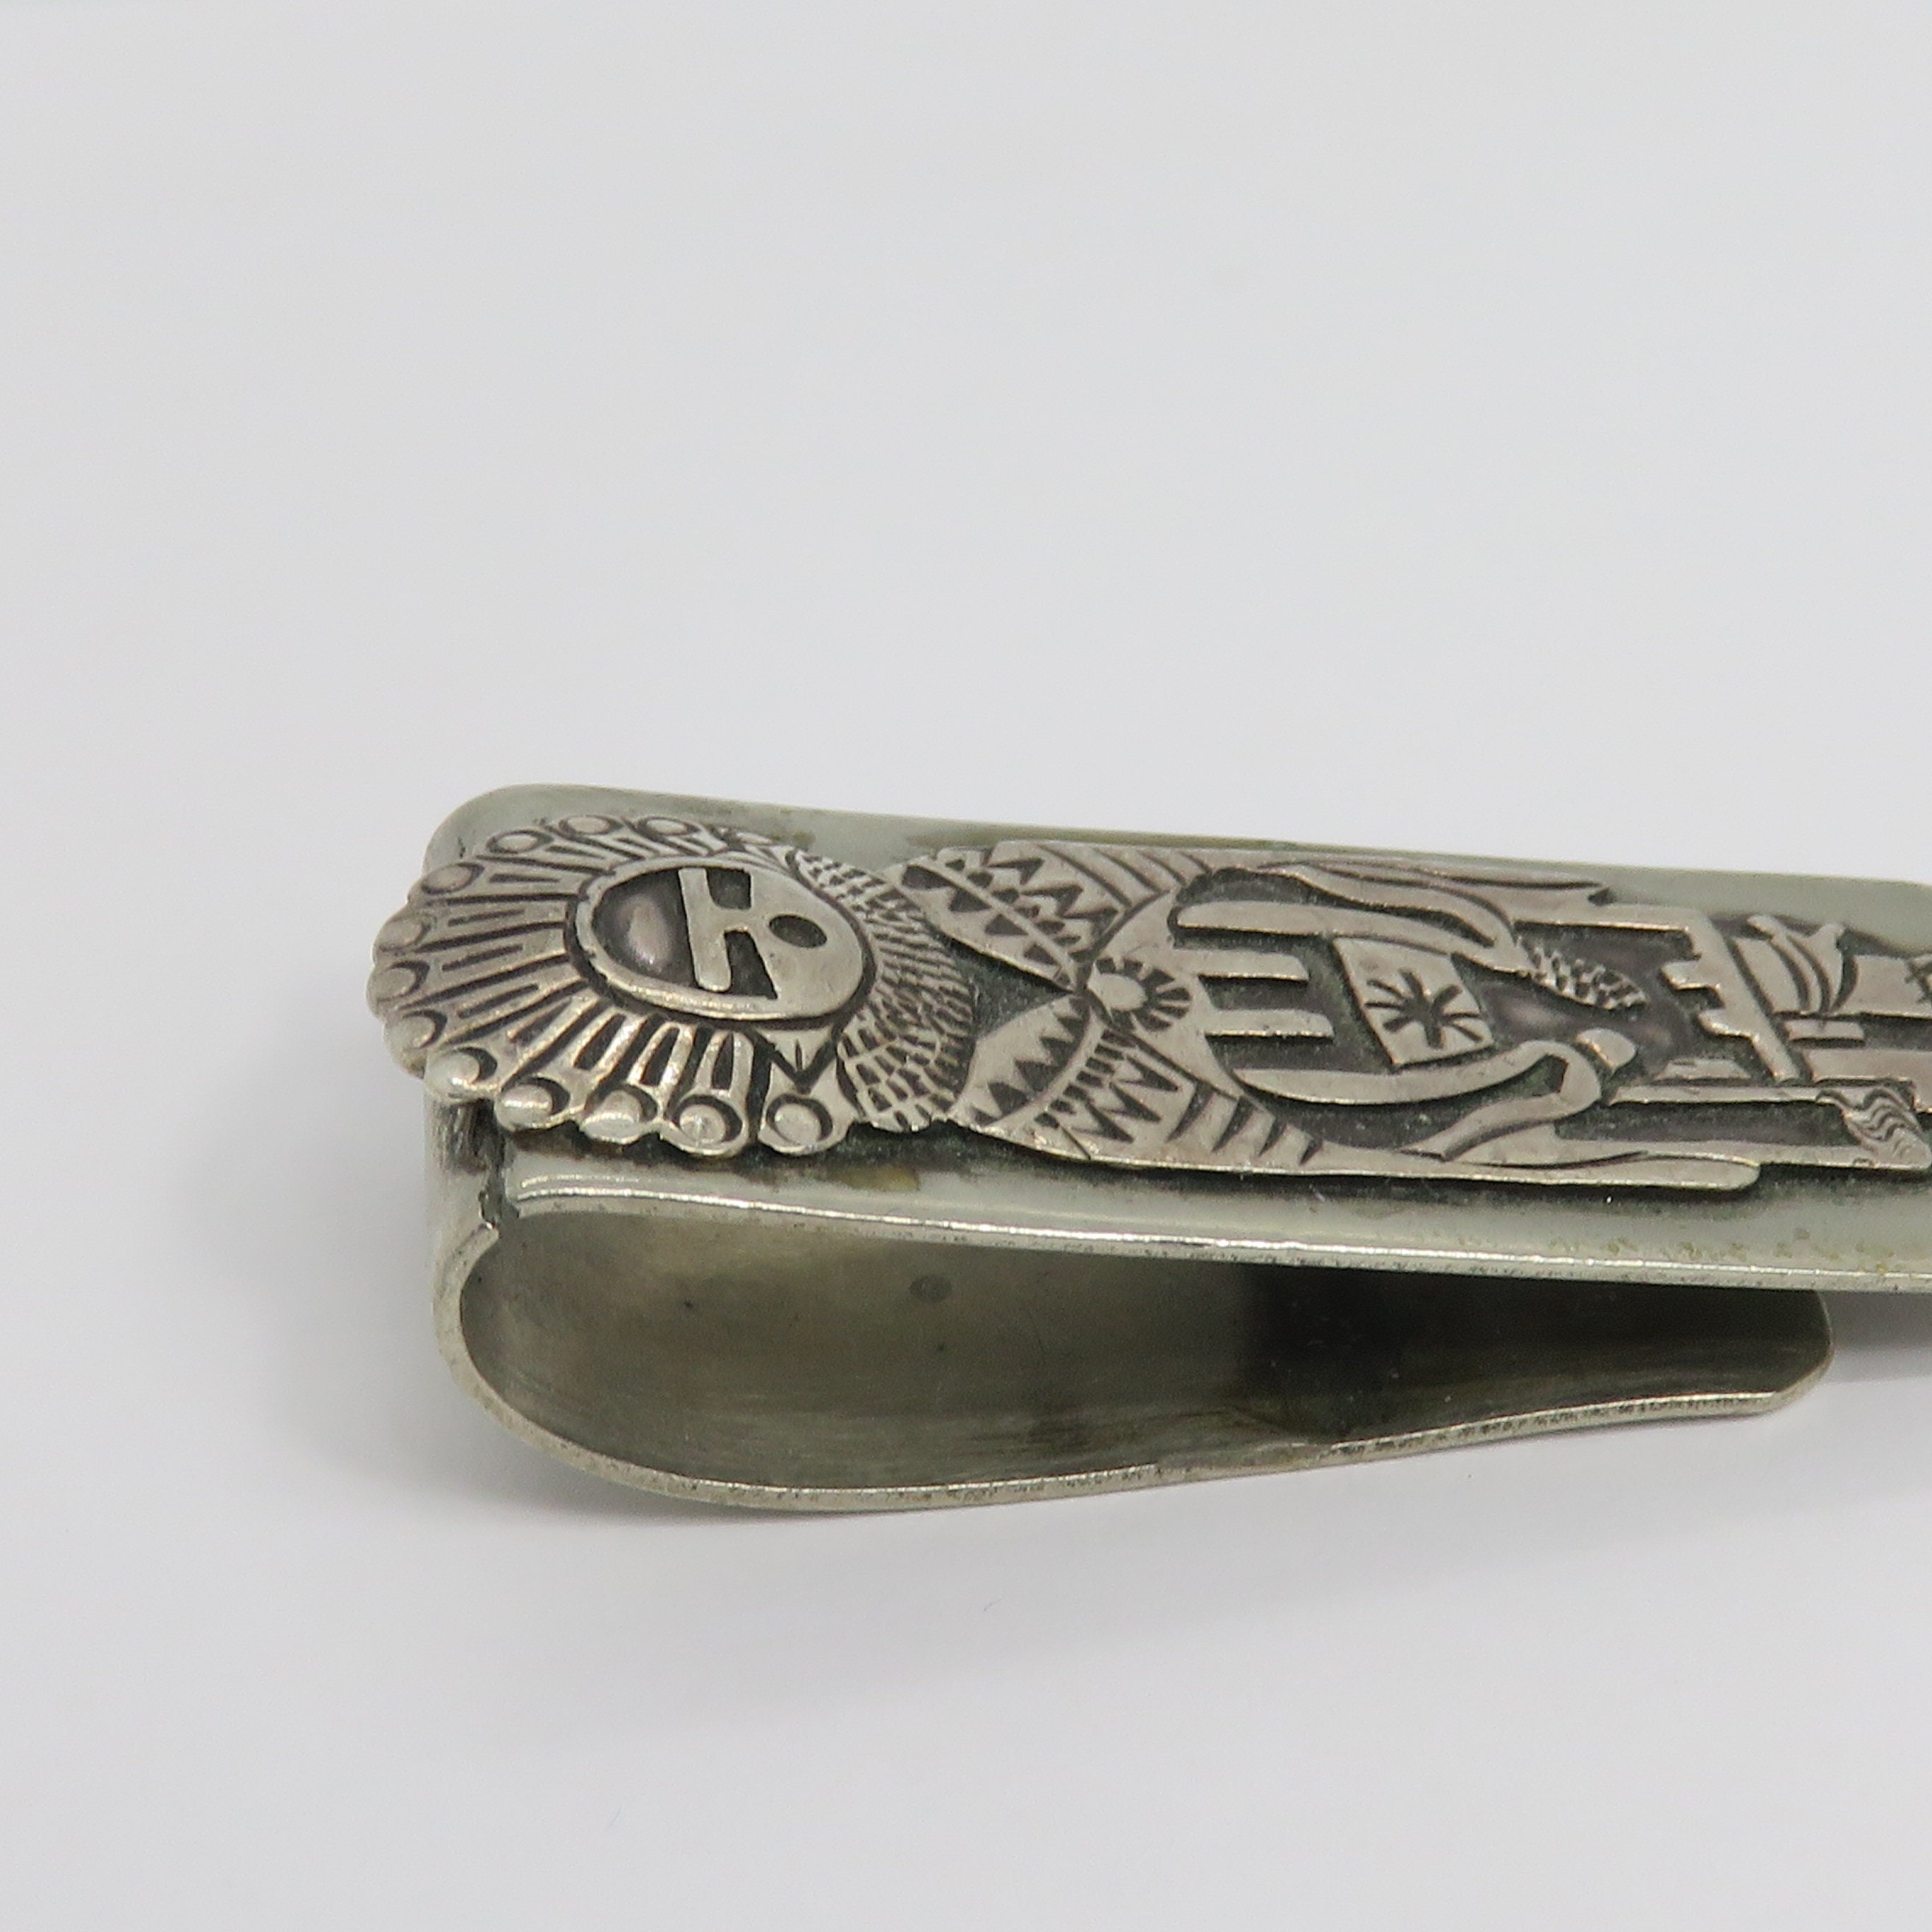 Vintage Sterling Kachina Doll Nickle Silver Money Clip. Bags & Purses Wallets & Money Clips Money Clips 